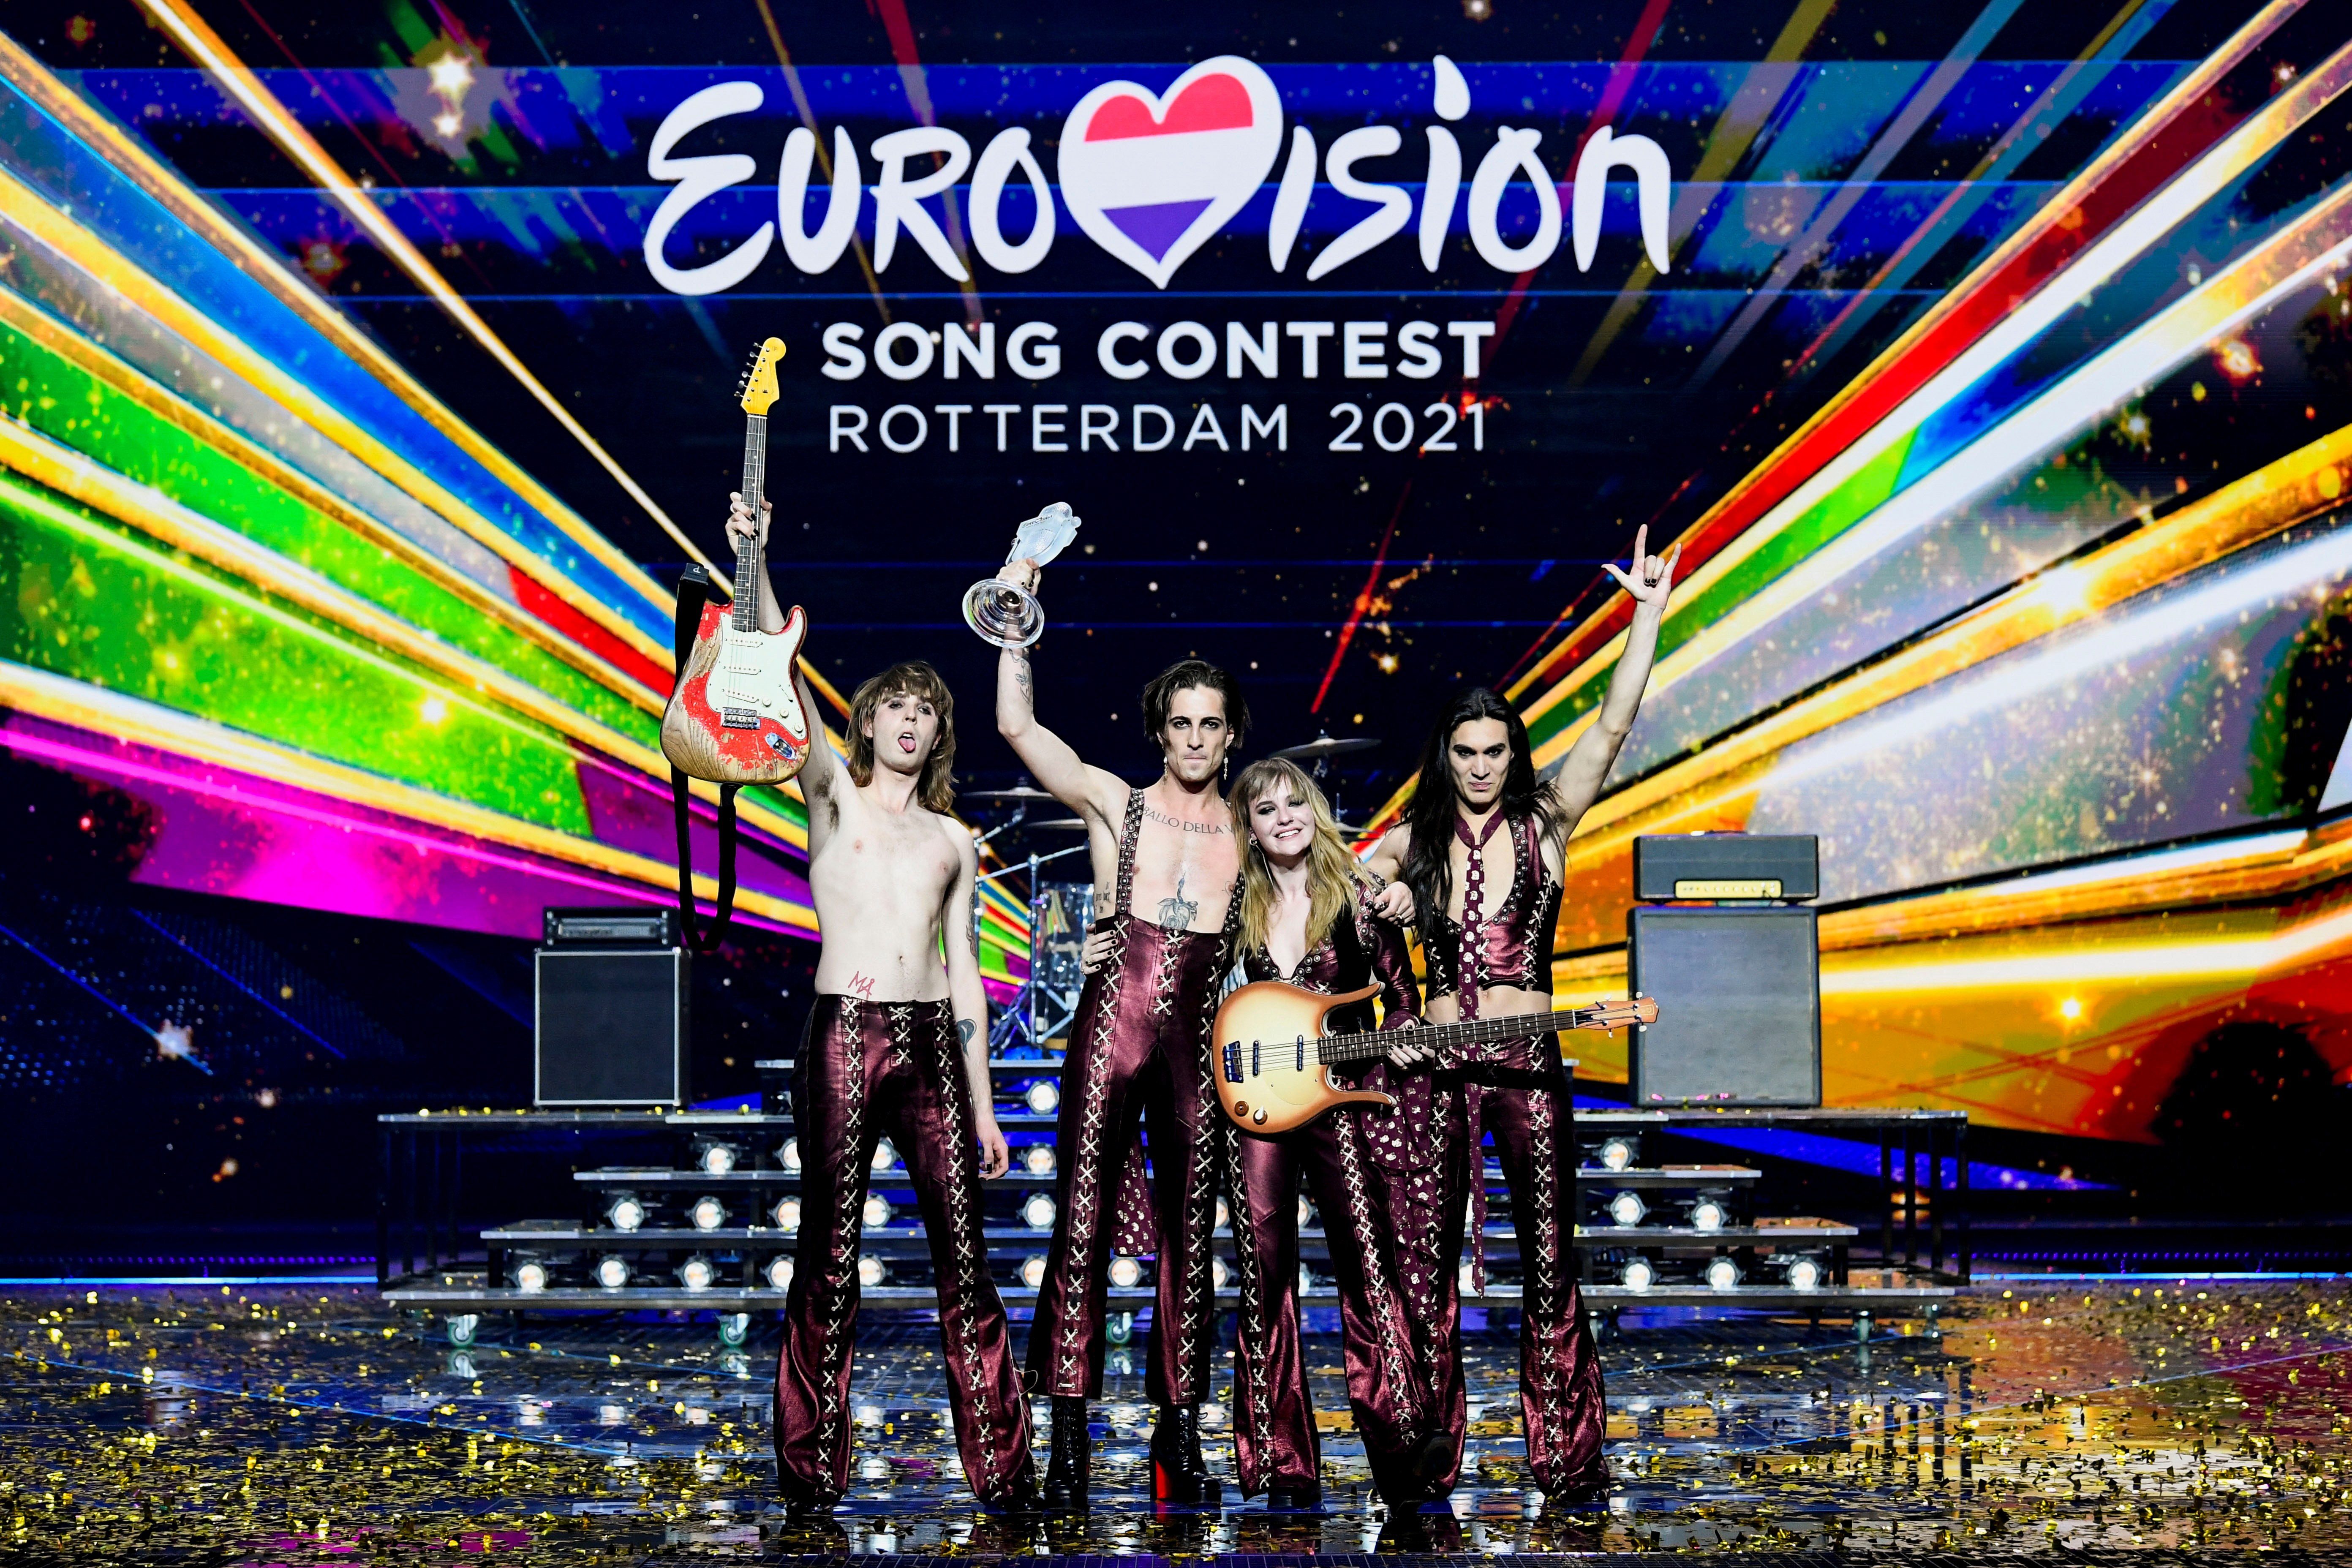 Italy’s raucous glam rock takes Eurovision by storm